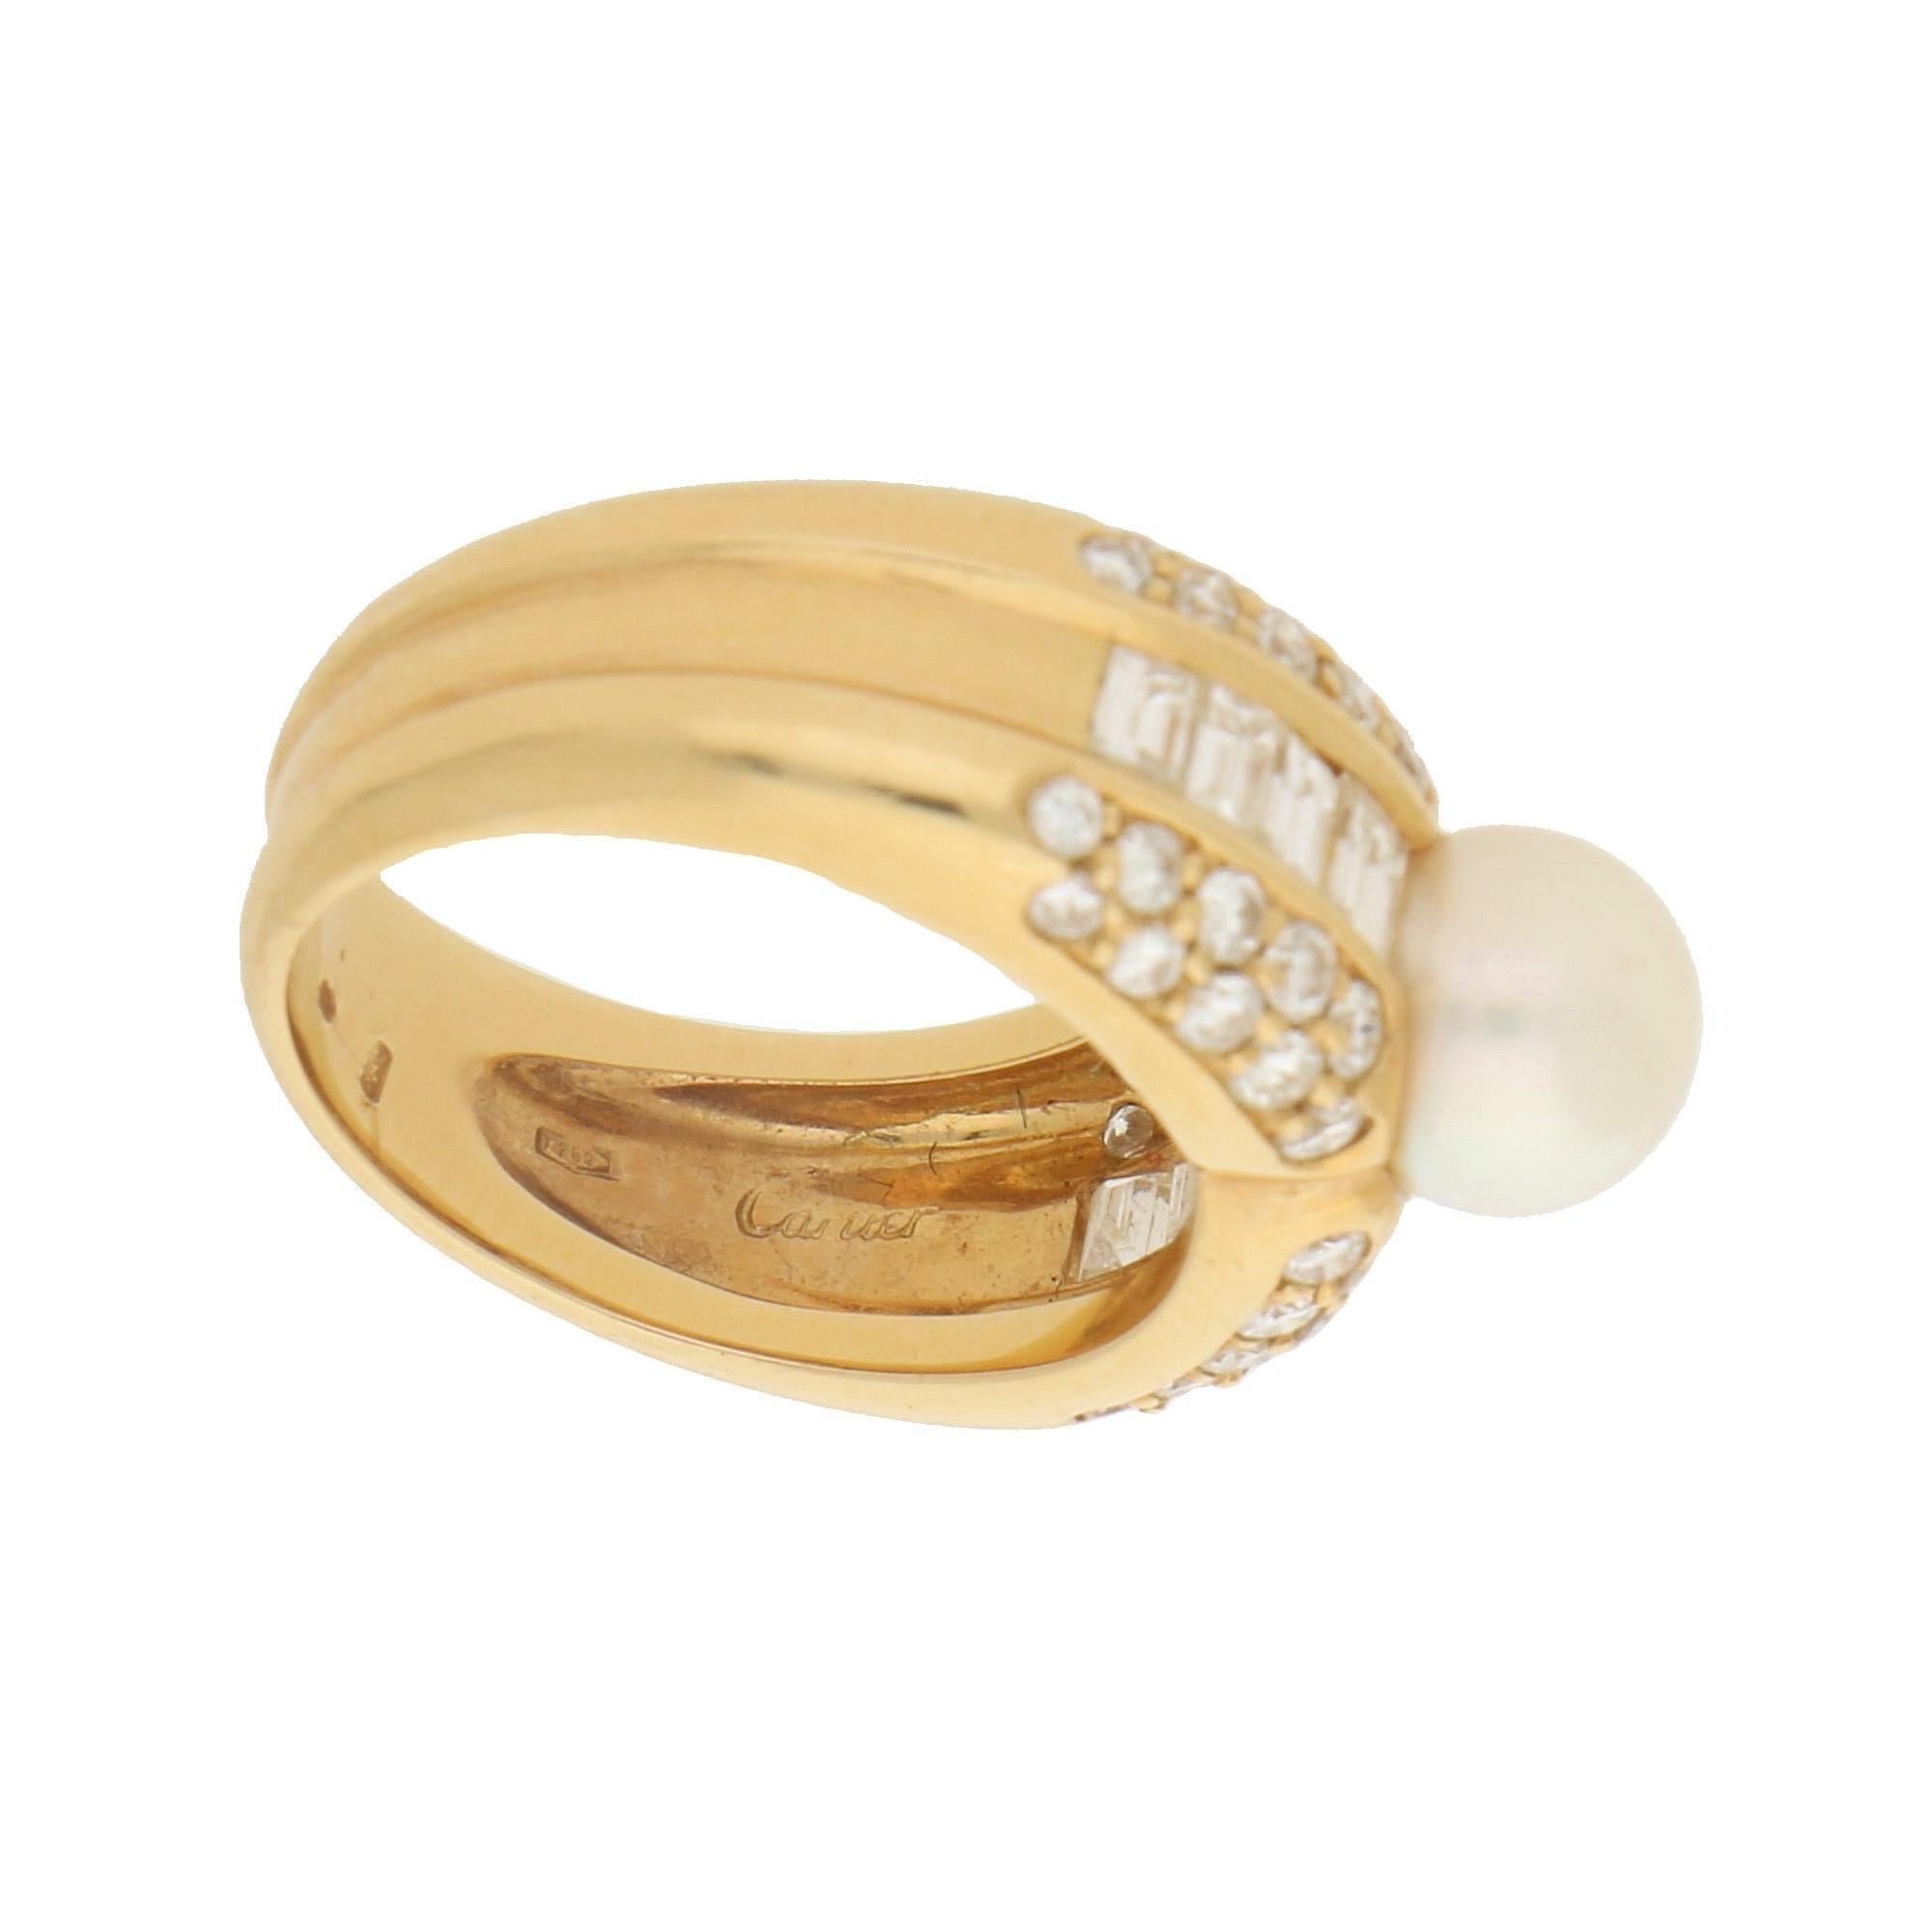 Cartier Pearl and Diamond Bombe Cocktail Ring in 18 Karat Yellow Gold 1